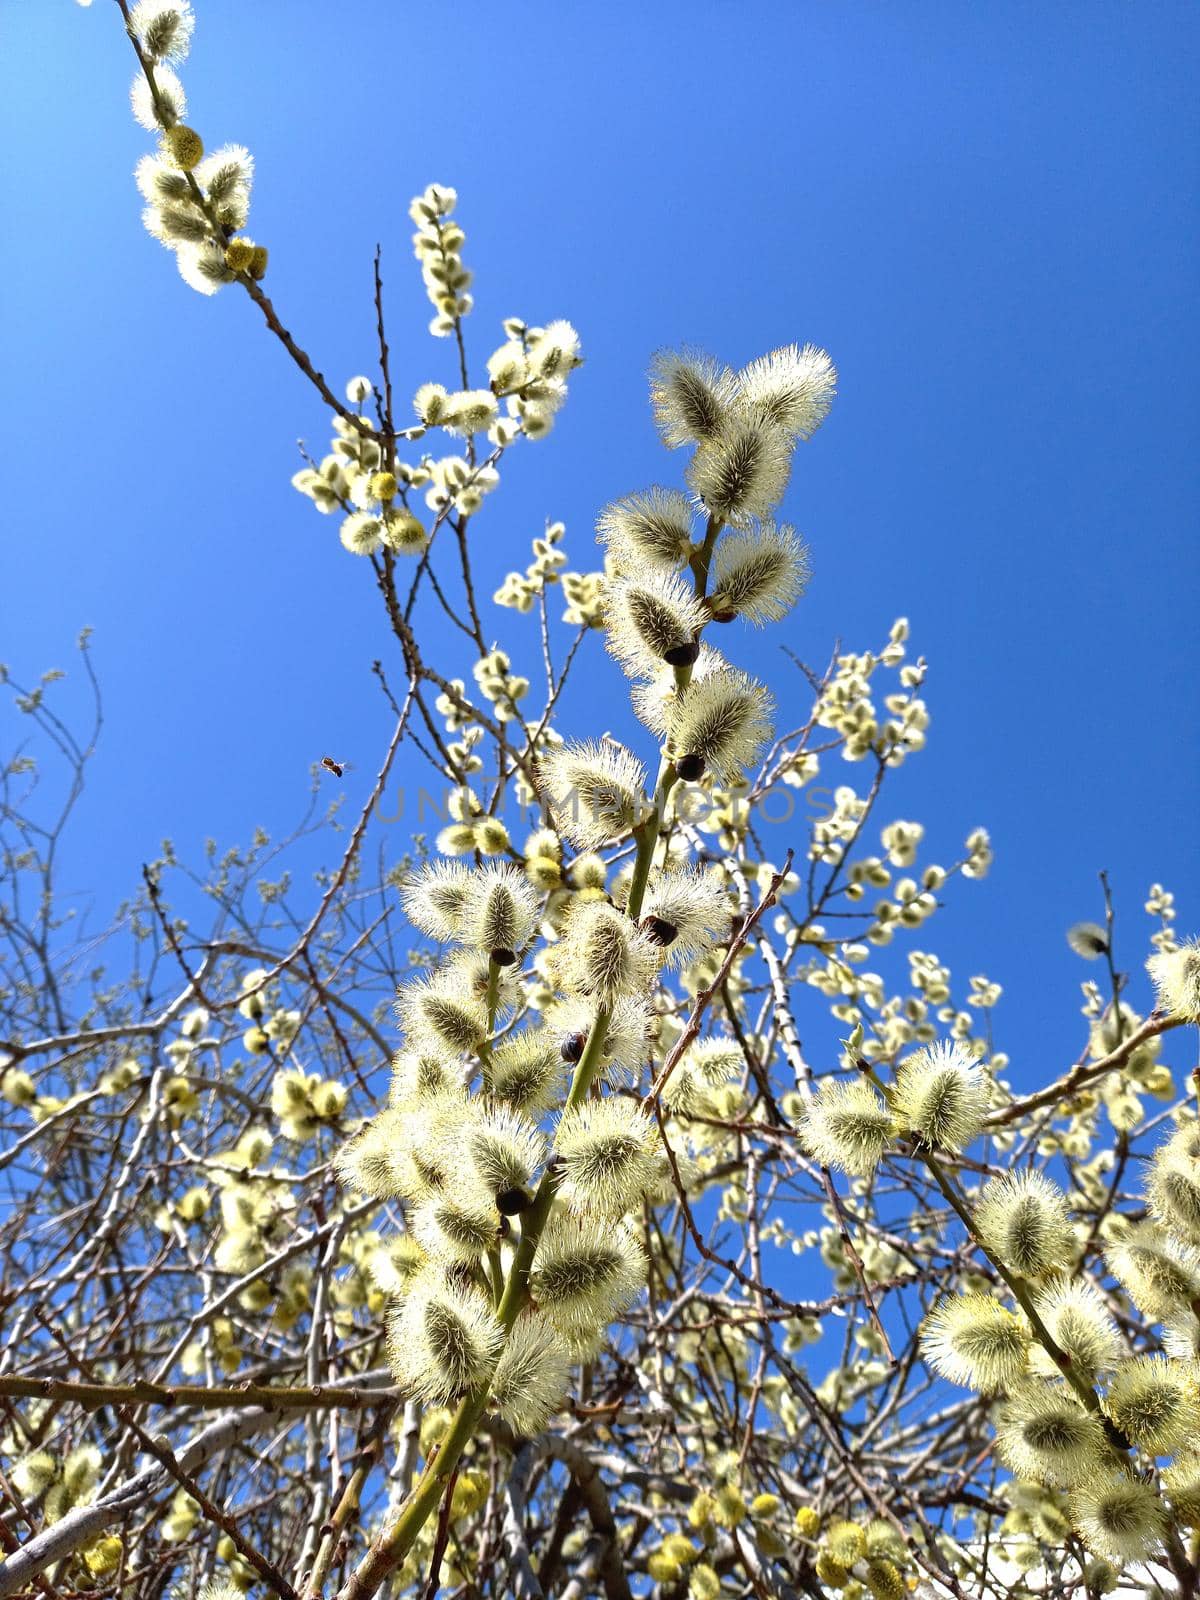 Blossoming willow in spring against a blue sky. by Olga26